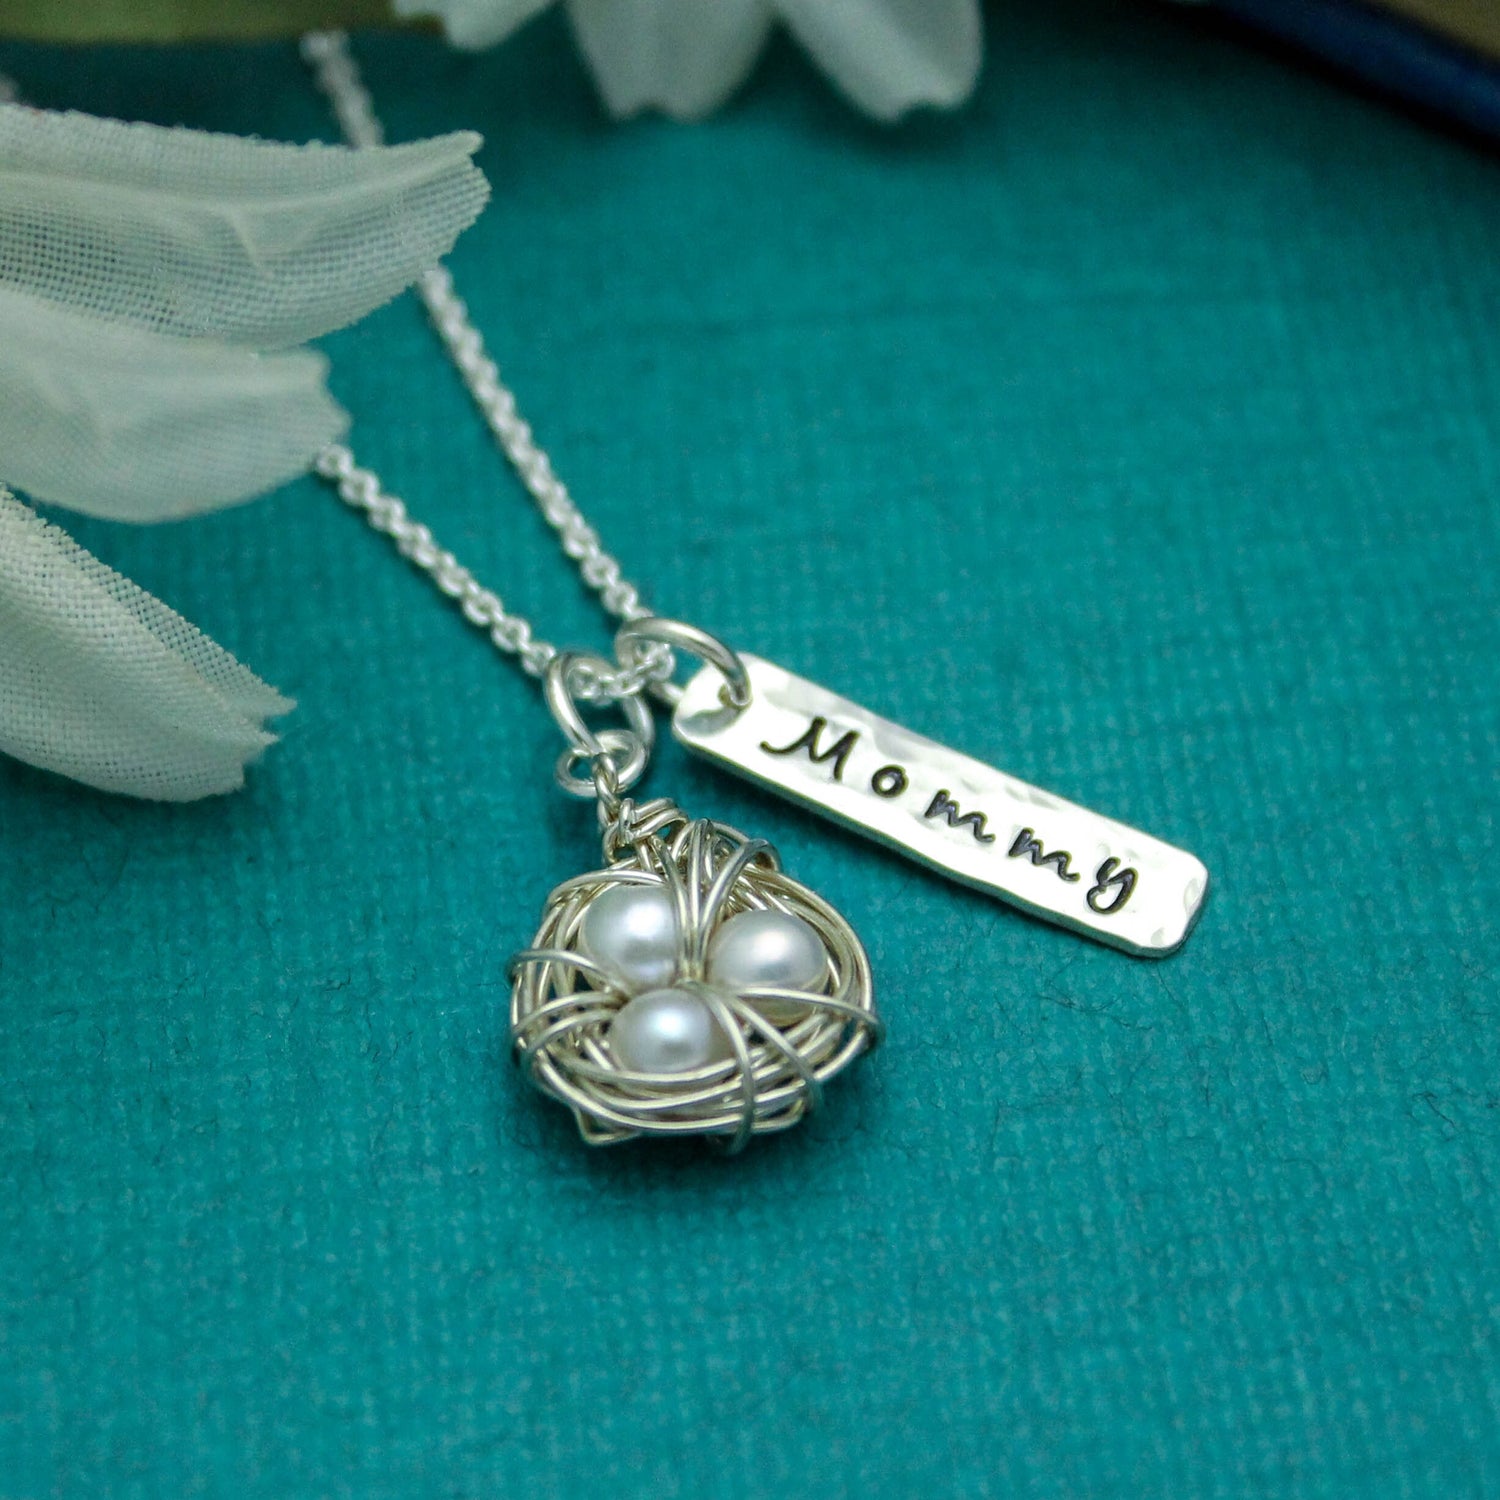 Bird's Nest Mother Necklace in Sterling Silver, Mother Necklace, Bird Nest Pearl Charm, Mother's Day Jewelry, Hand Stamped Personalized Mom